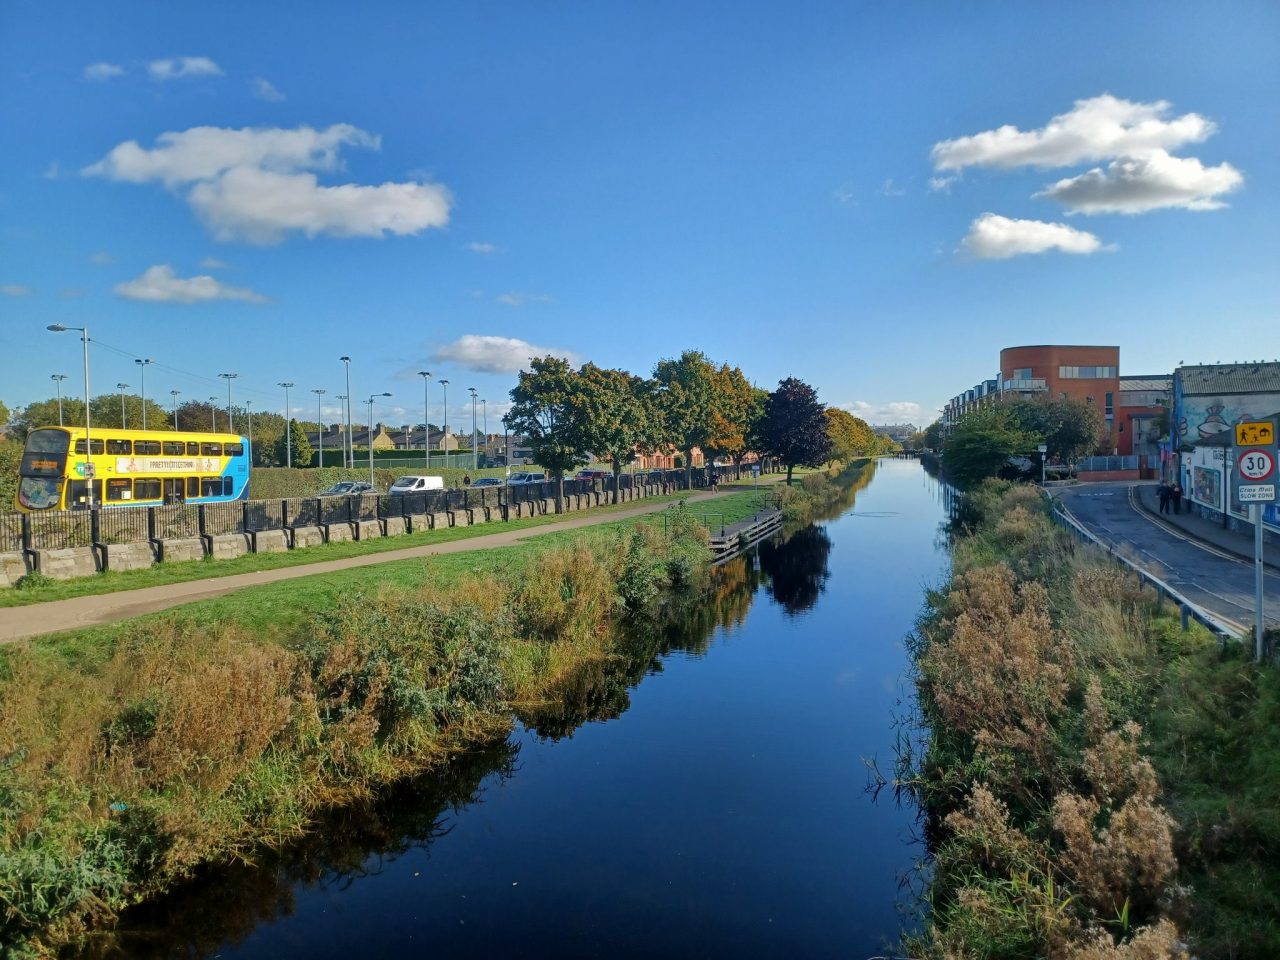 Royal Canal, Witworth Road, Dublin 7 and Dublin 9